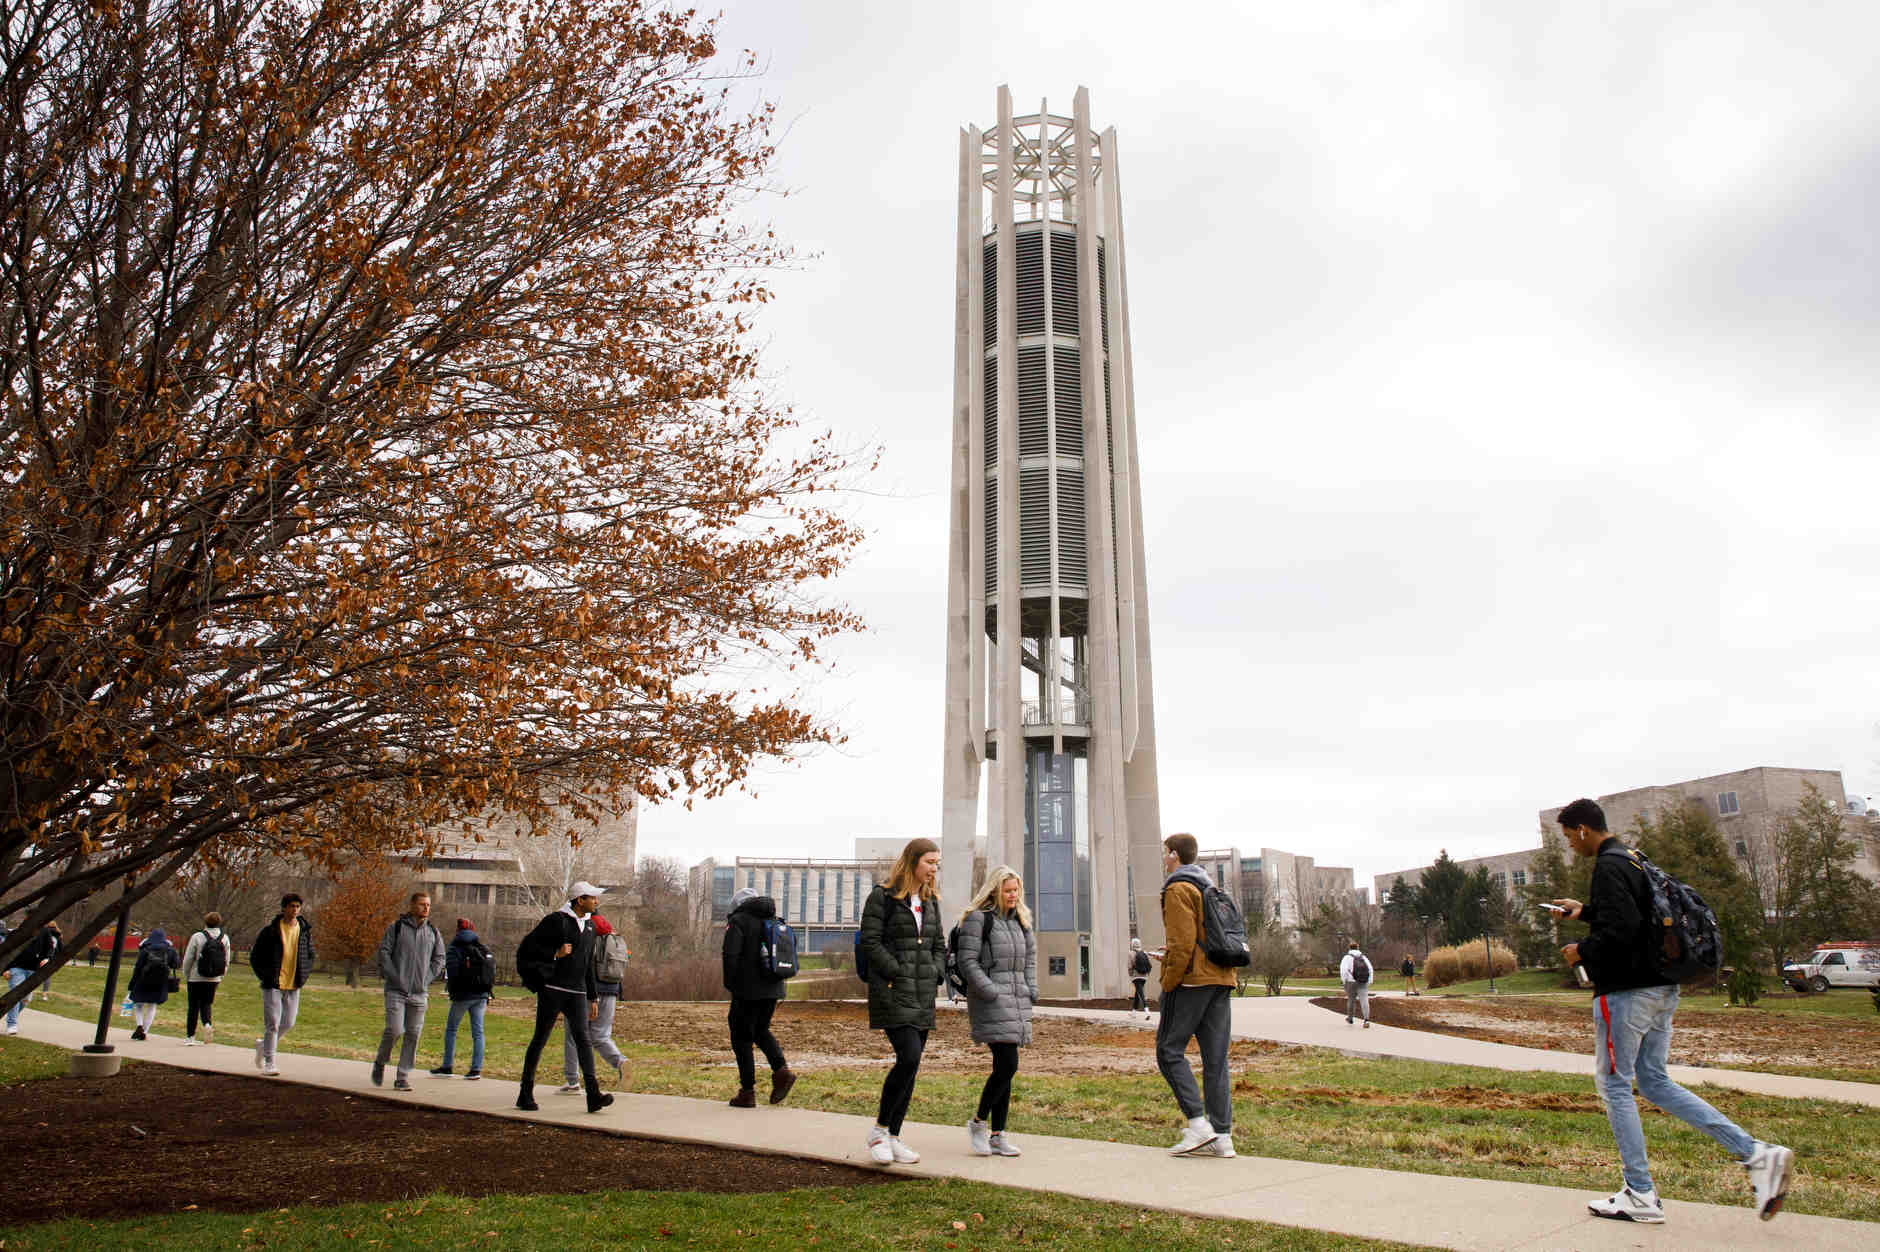 Students walk past the newly-completed Metz Bicentennial Grand Carillon in the Cox Arboretum at Indiana University Bloomington on Monday, Jan. 13, 2020. (James Brosher/Indiana University)